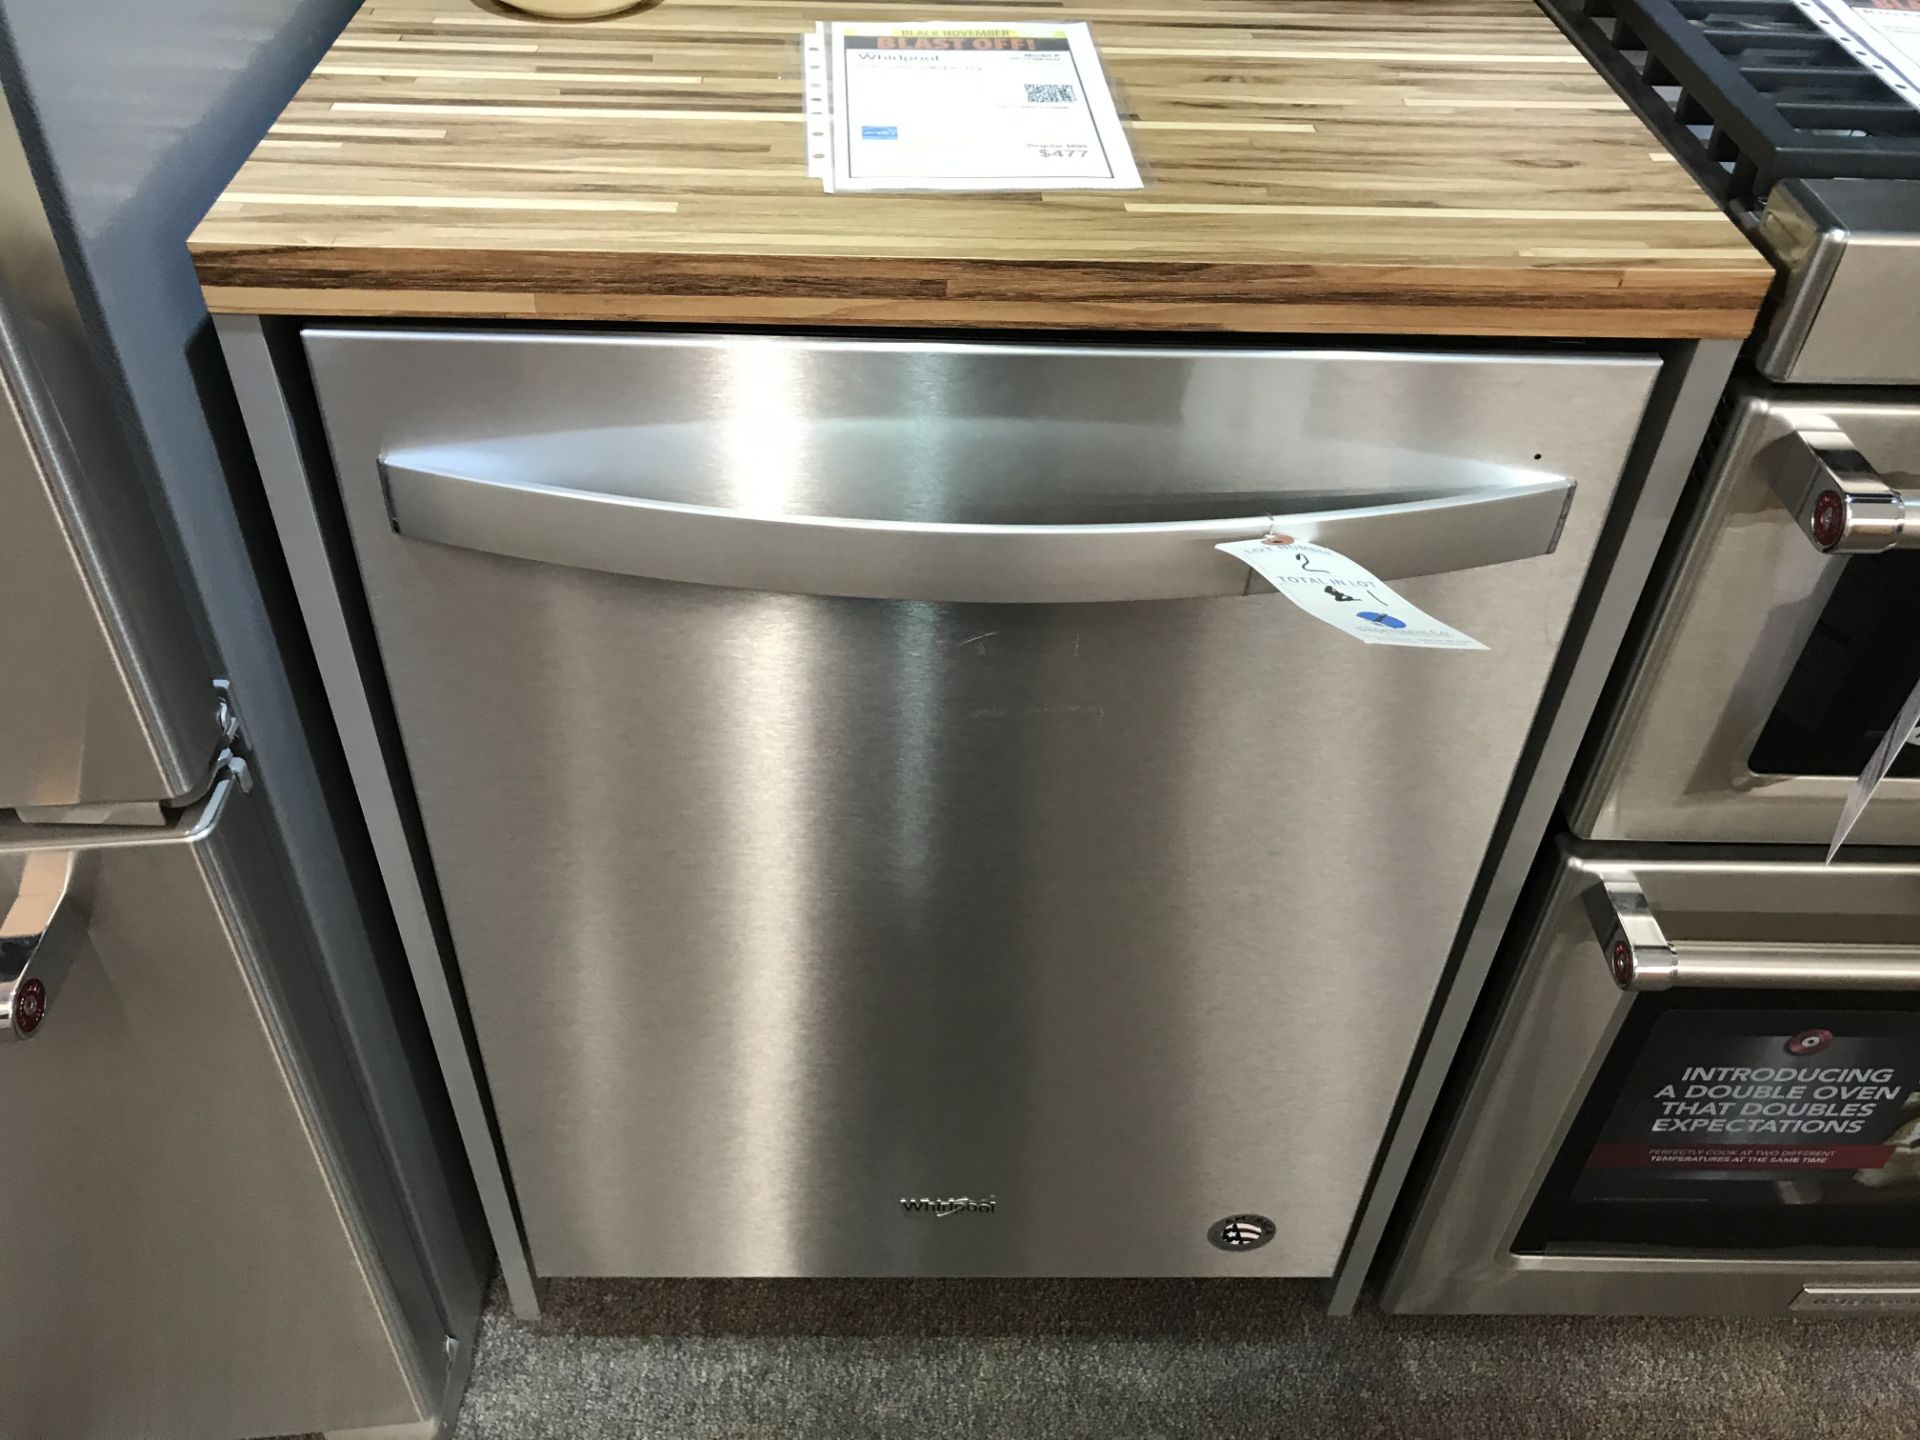 Whirlpool SS Dishwasher 23.88W x 24.5D" x 34.5"H (Retail Price: $477 See Tag)